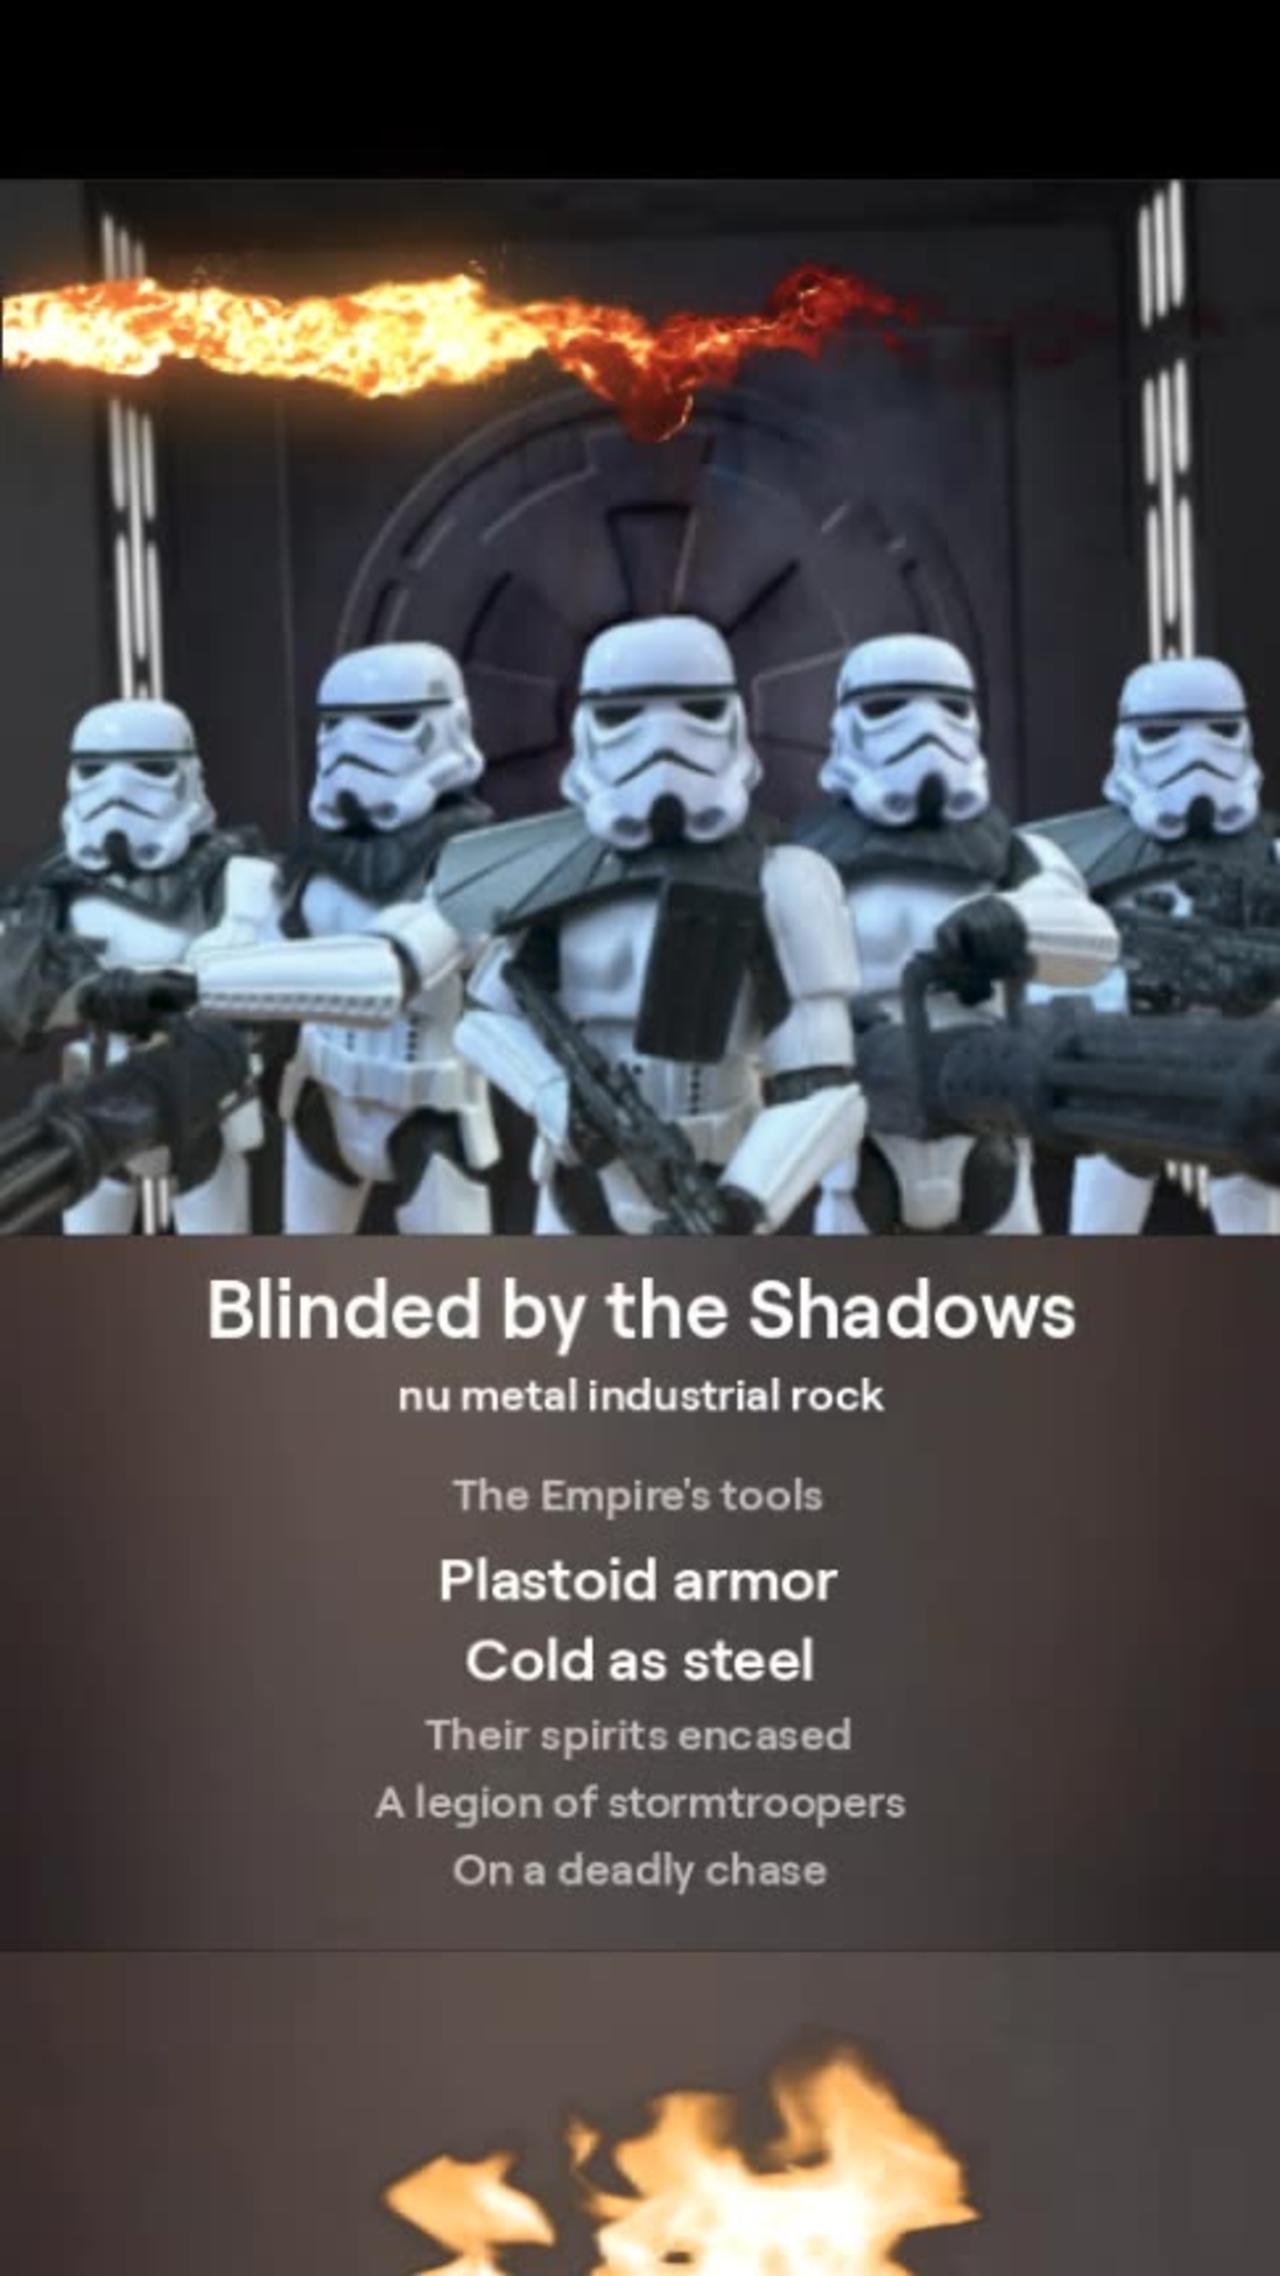 Star Wars - "Blinded by the Shadows" Music Video